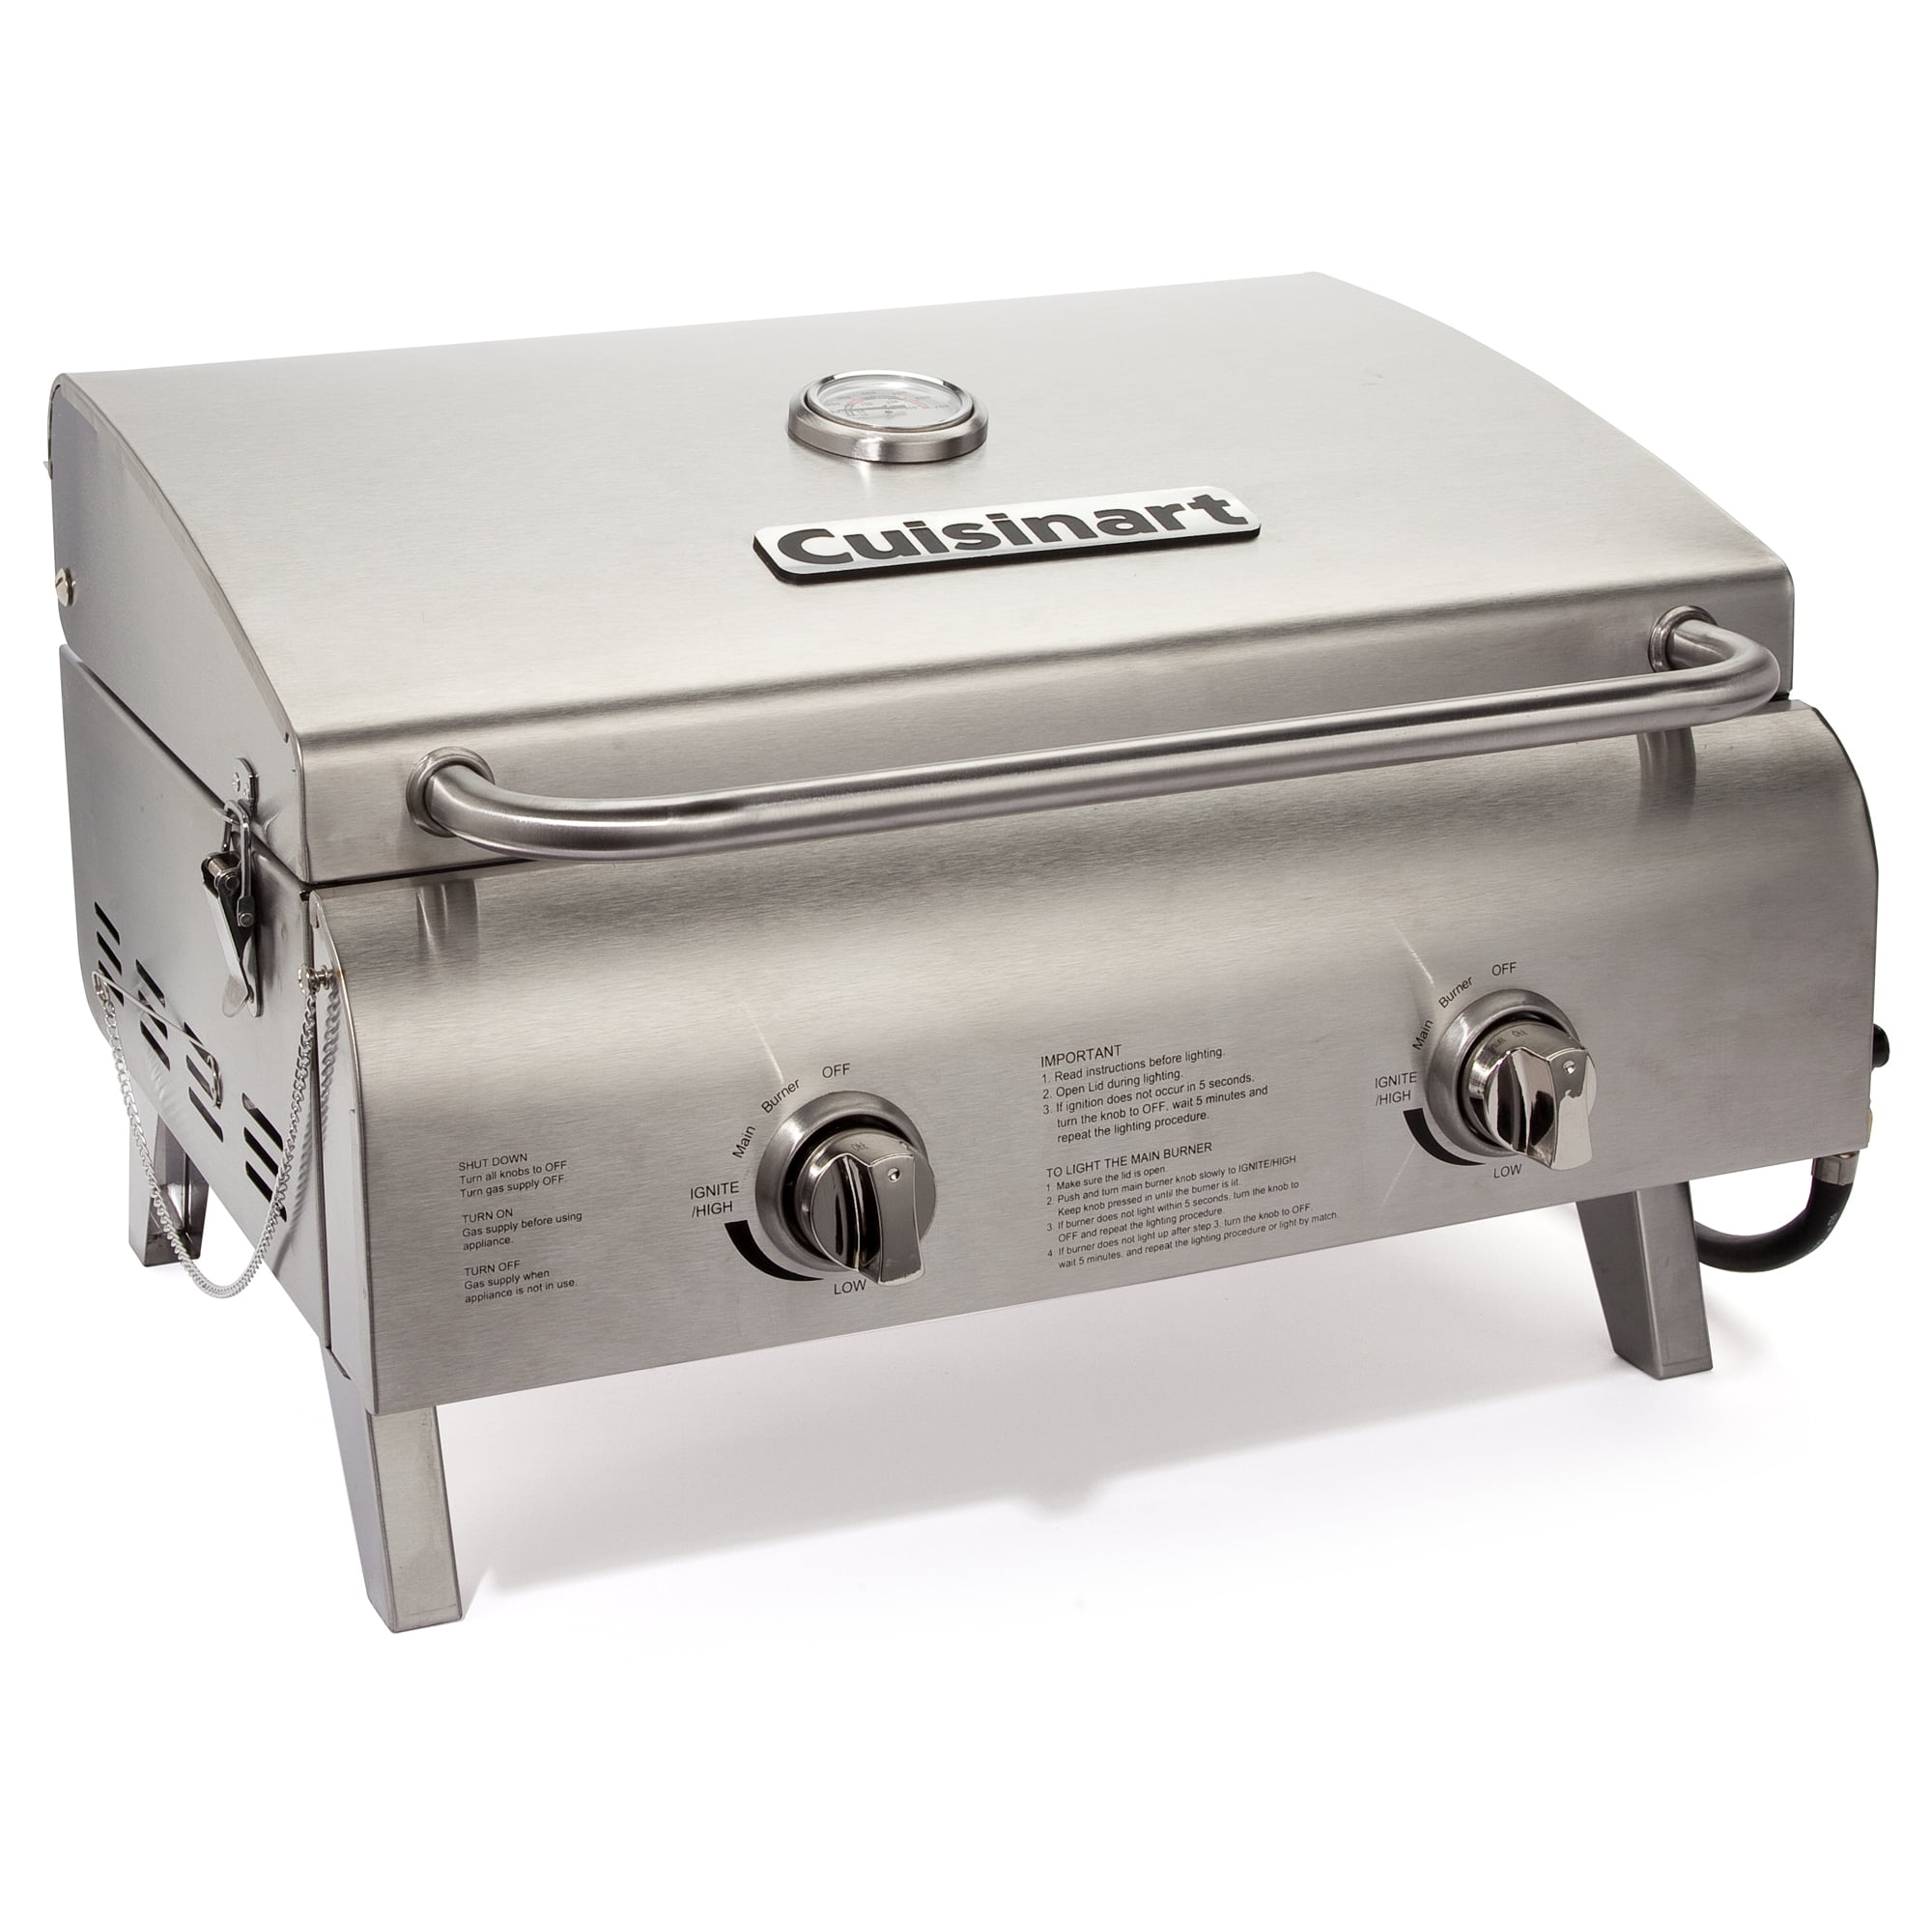 Details about   Grill Cover for Pit Boss & Cuisinart Tabletop Two-Burner Portable Grill 24" 